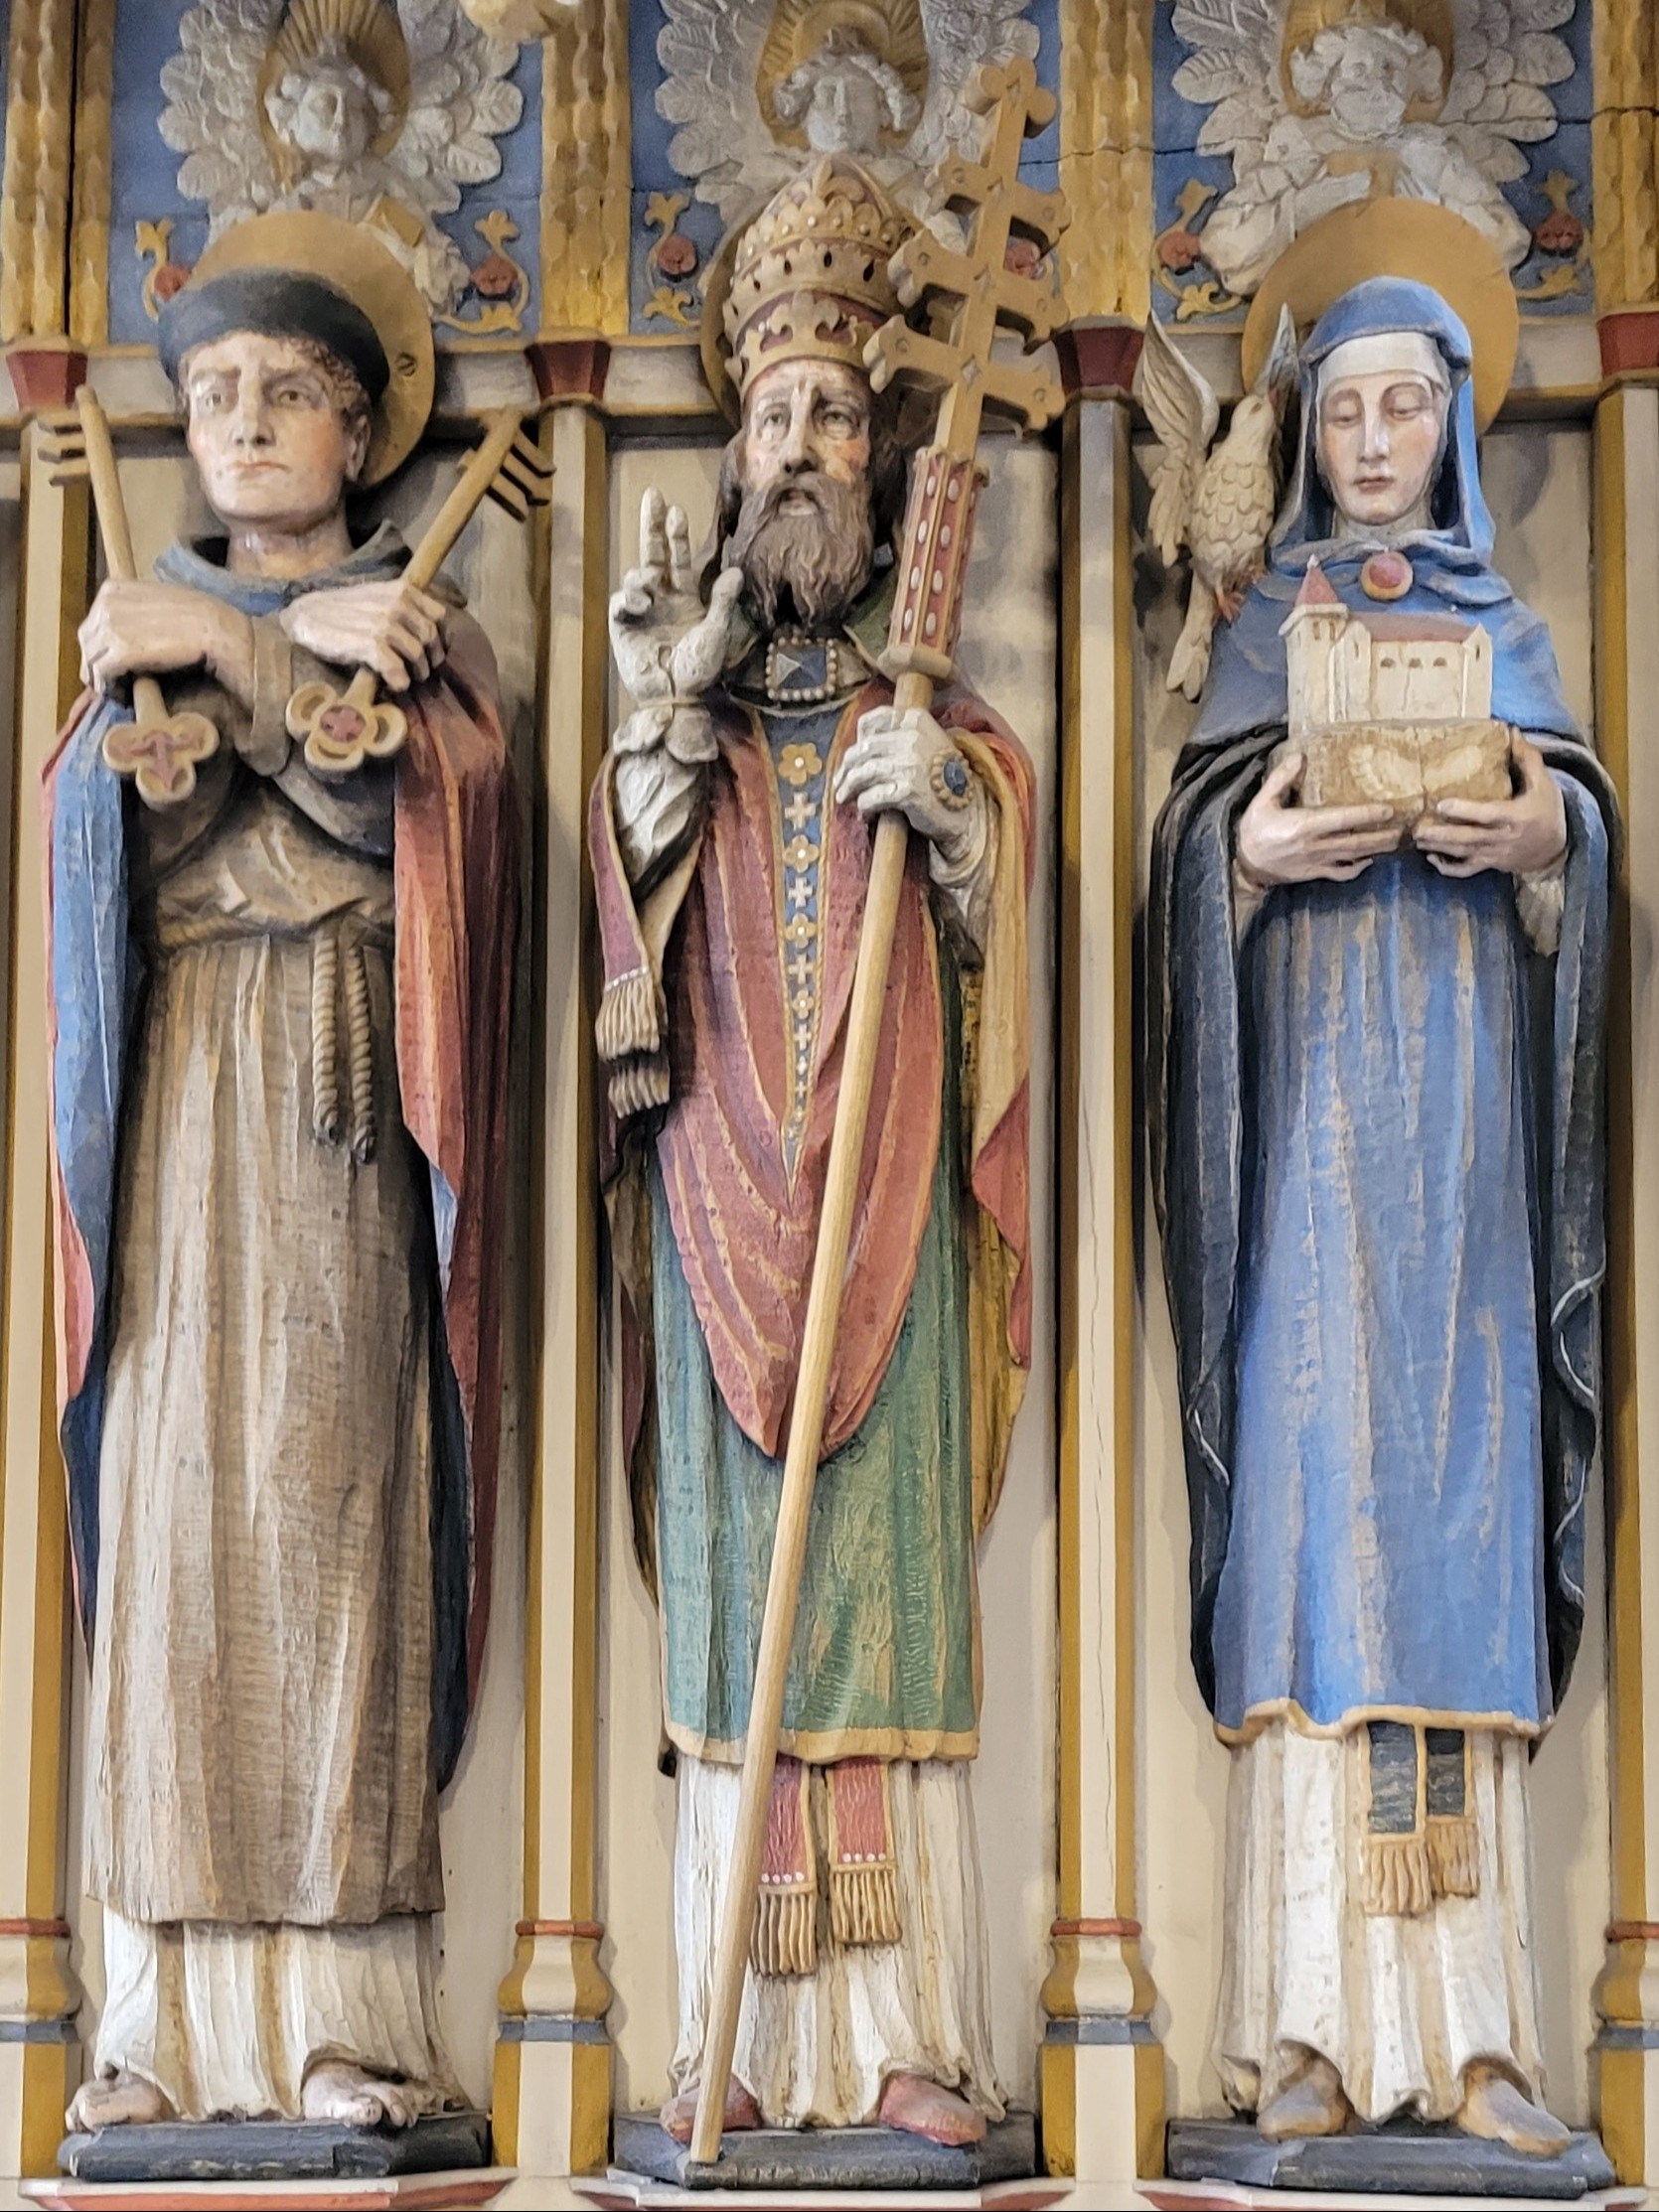 St Peter, Pope Gregory & St Mi